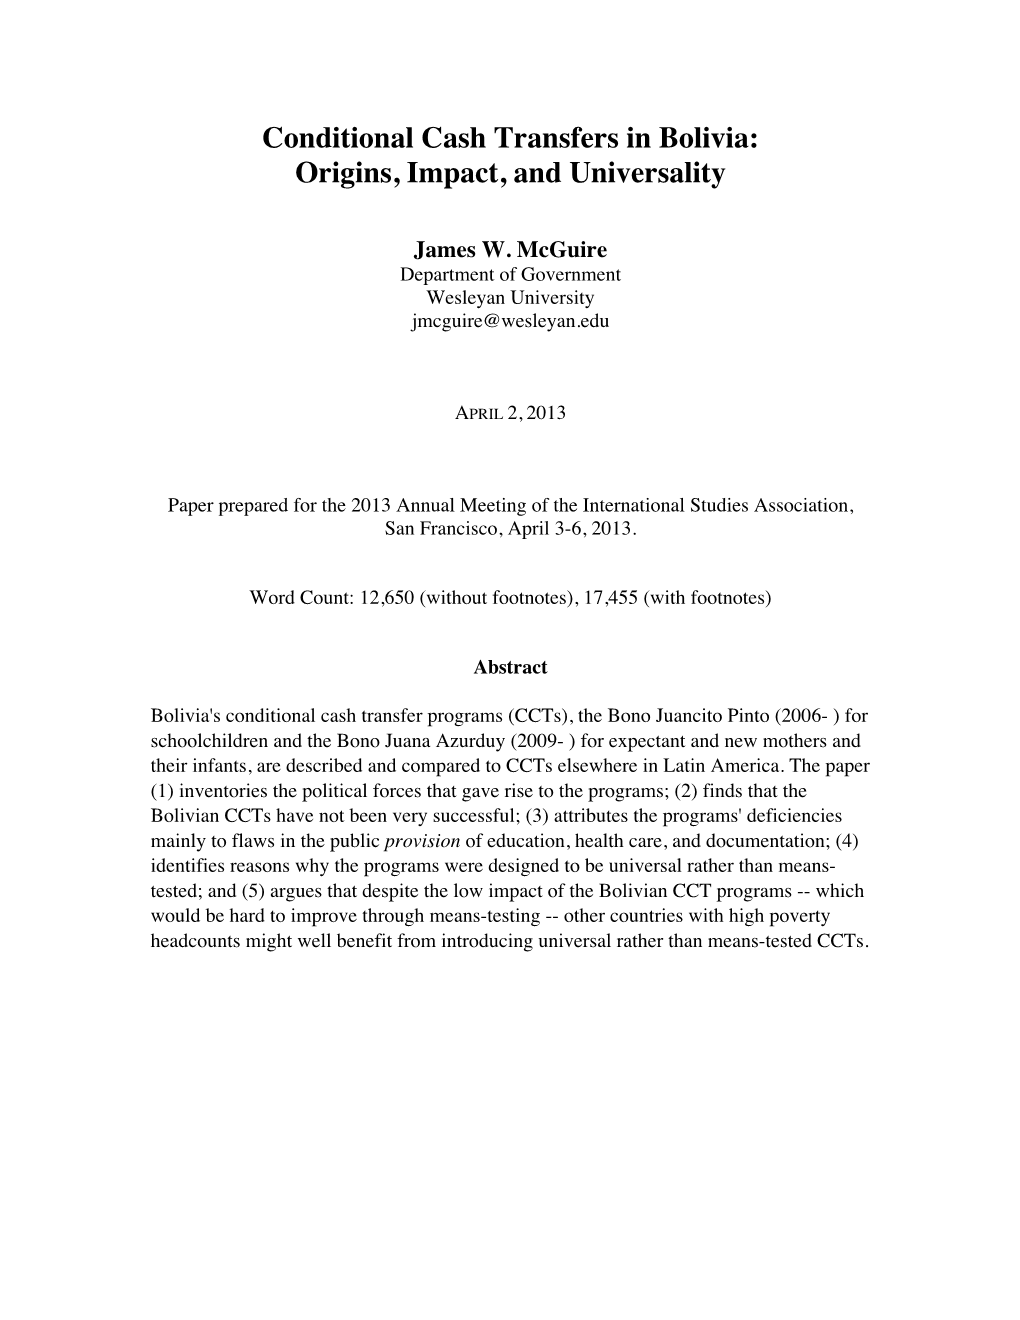 Conditional Cash Transfers in Bolivia: Origins, Impact, and Universality